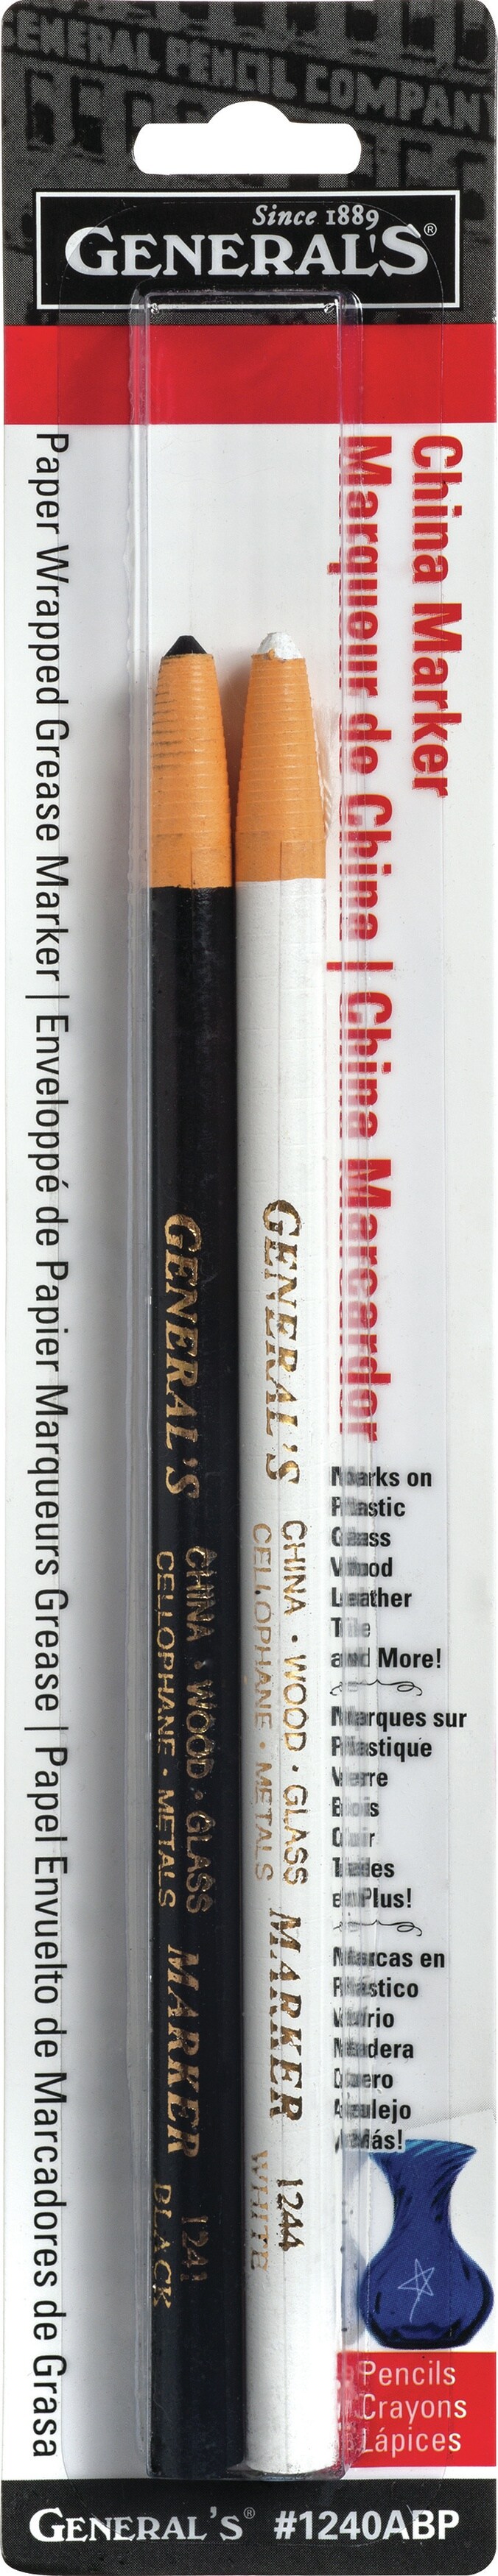  Diamond Peel-Off China Markers/Grease Pencils For